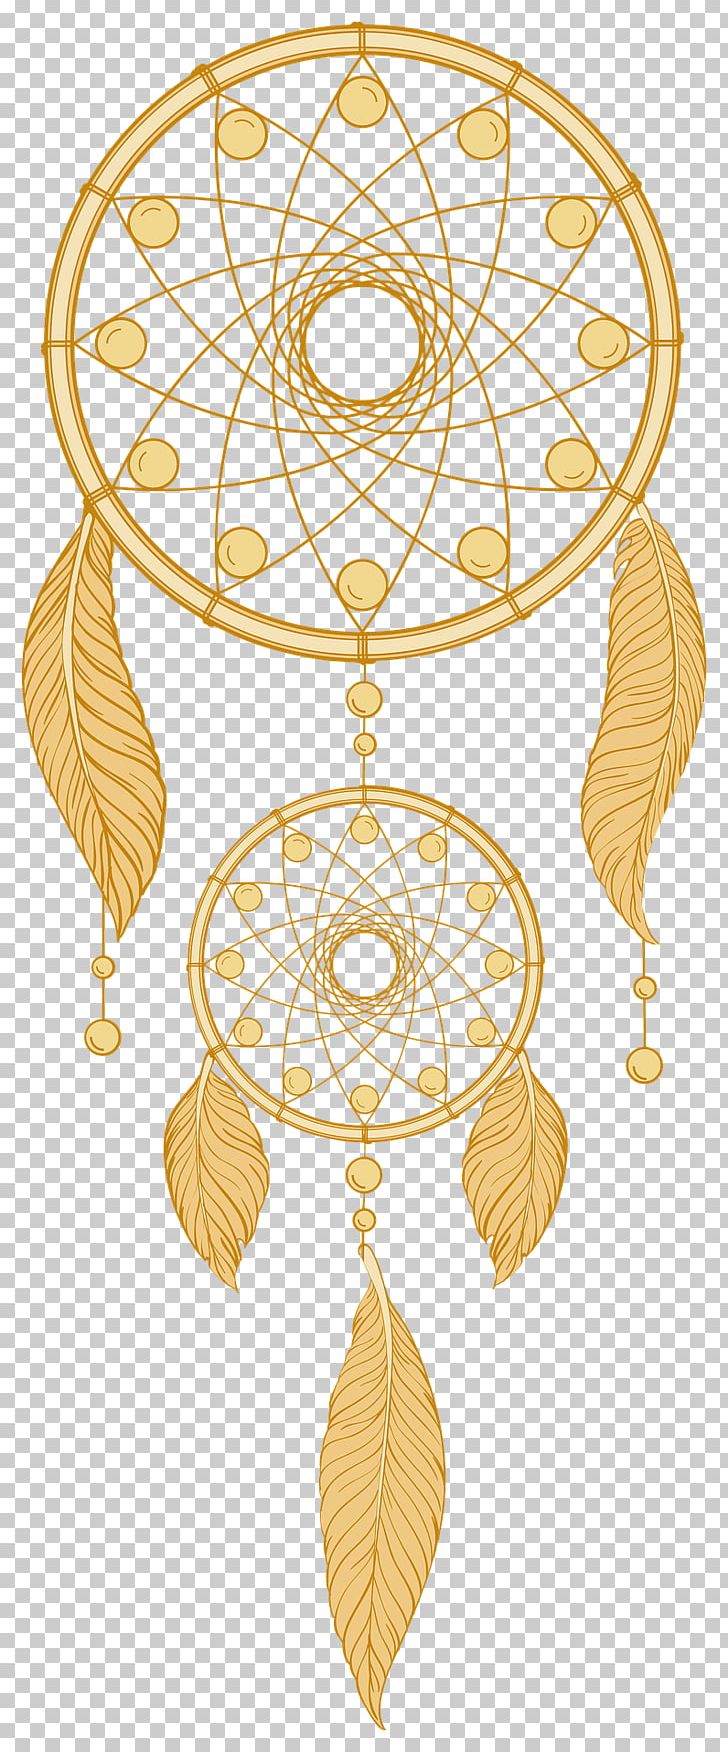 Dreamcatcher Native Americans In The United States Hinduism Medicine Wheel PNG, Clipart, Body Jewelry, Circle, Dream, Dreamcatcher, Feather Free PNG Download